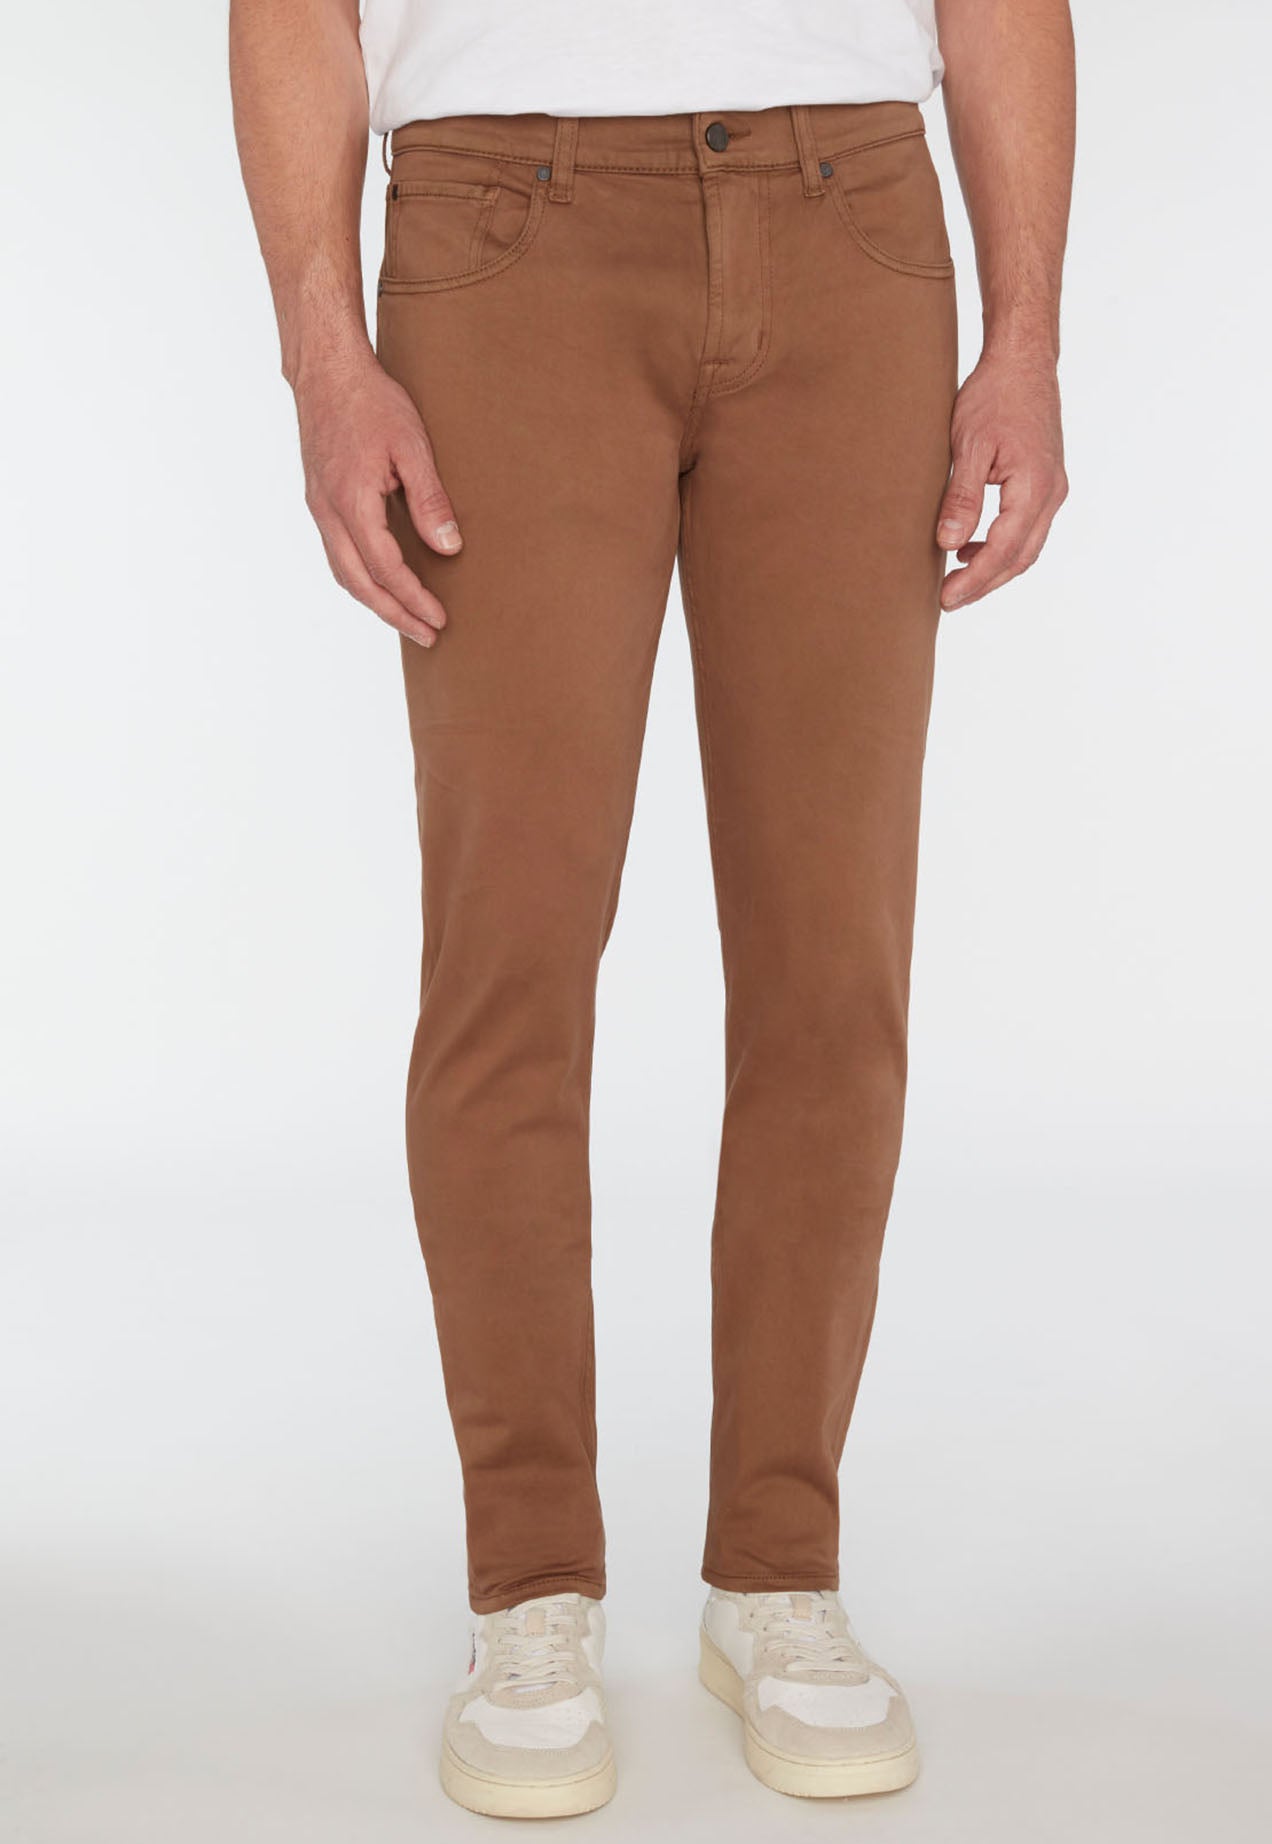 7 FOR ALL MANKIND - SLIMMY TAPERED Luxe Performance Plus Colour In Walnut JSMXV600WN